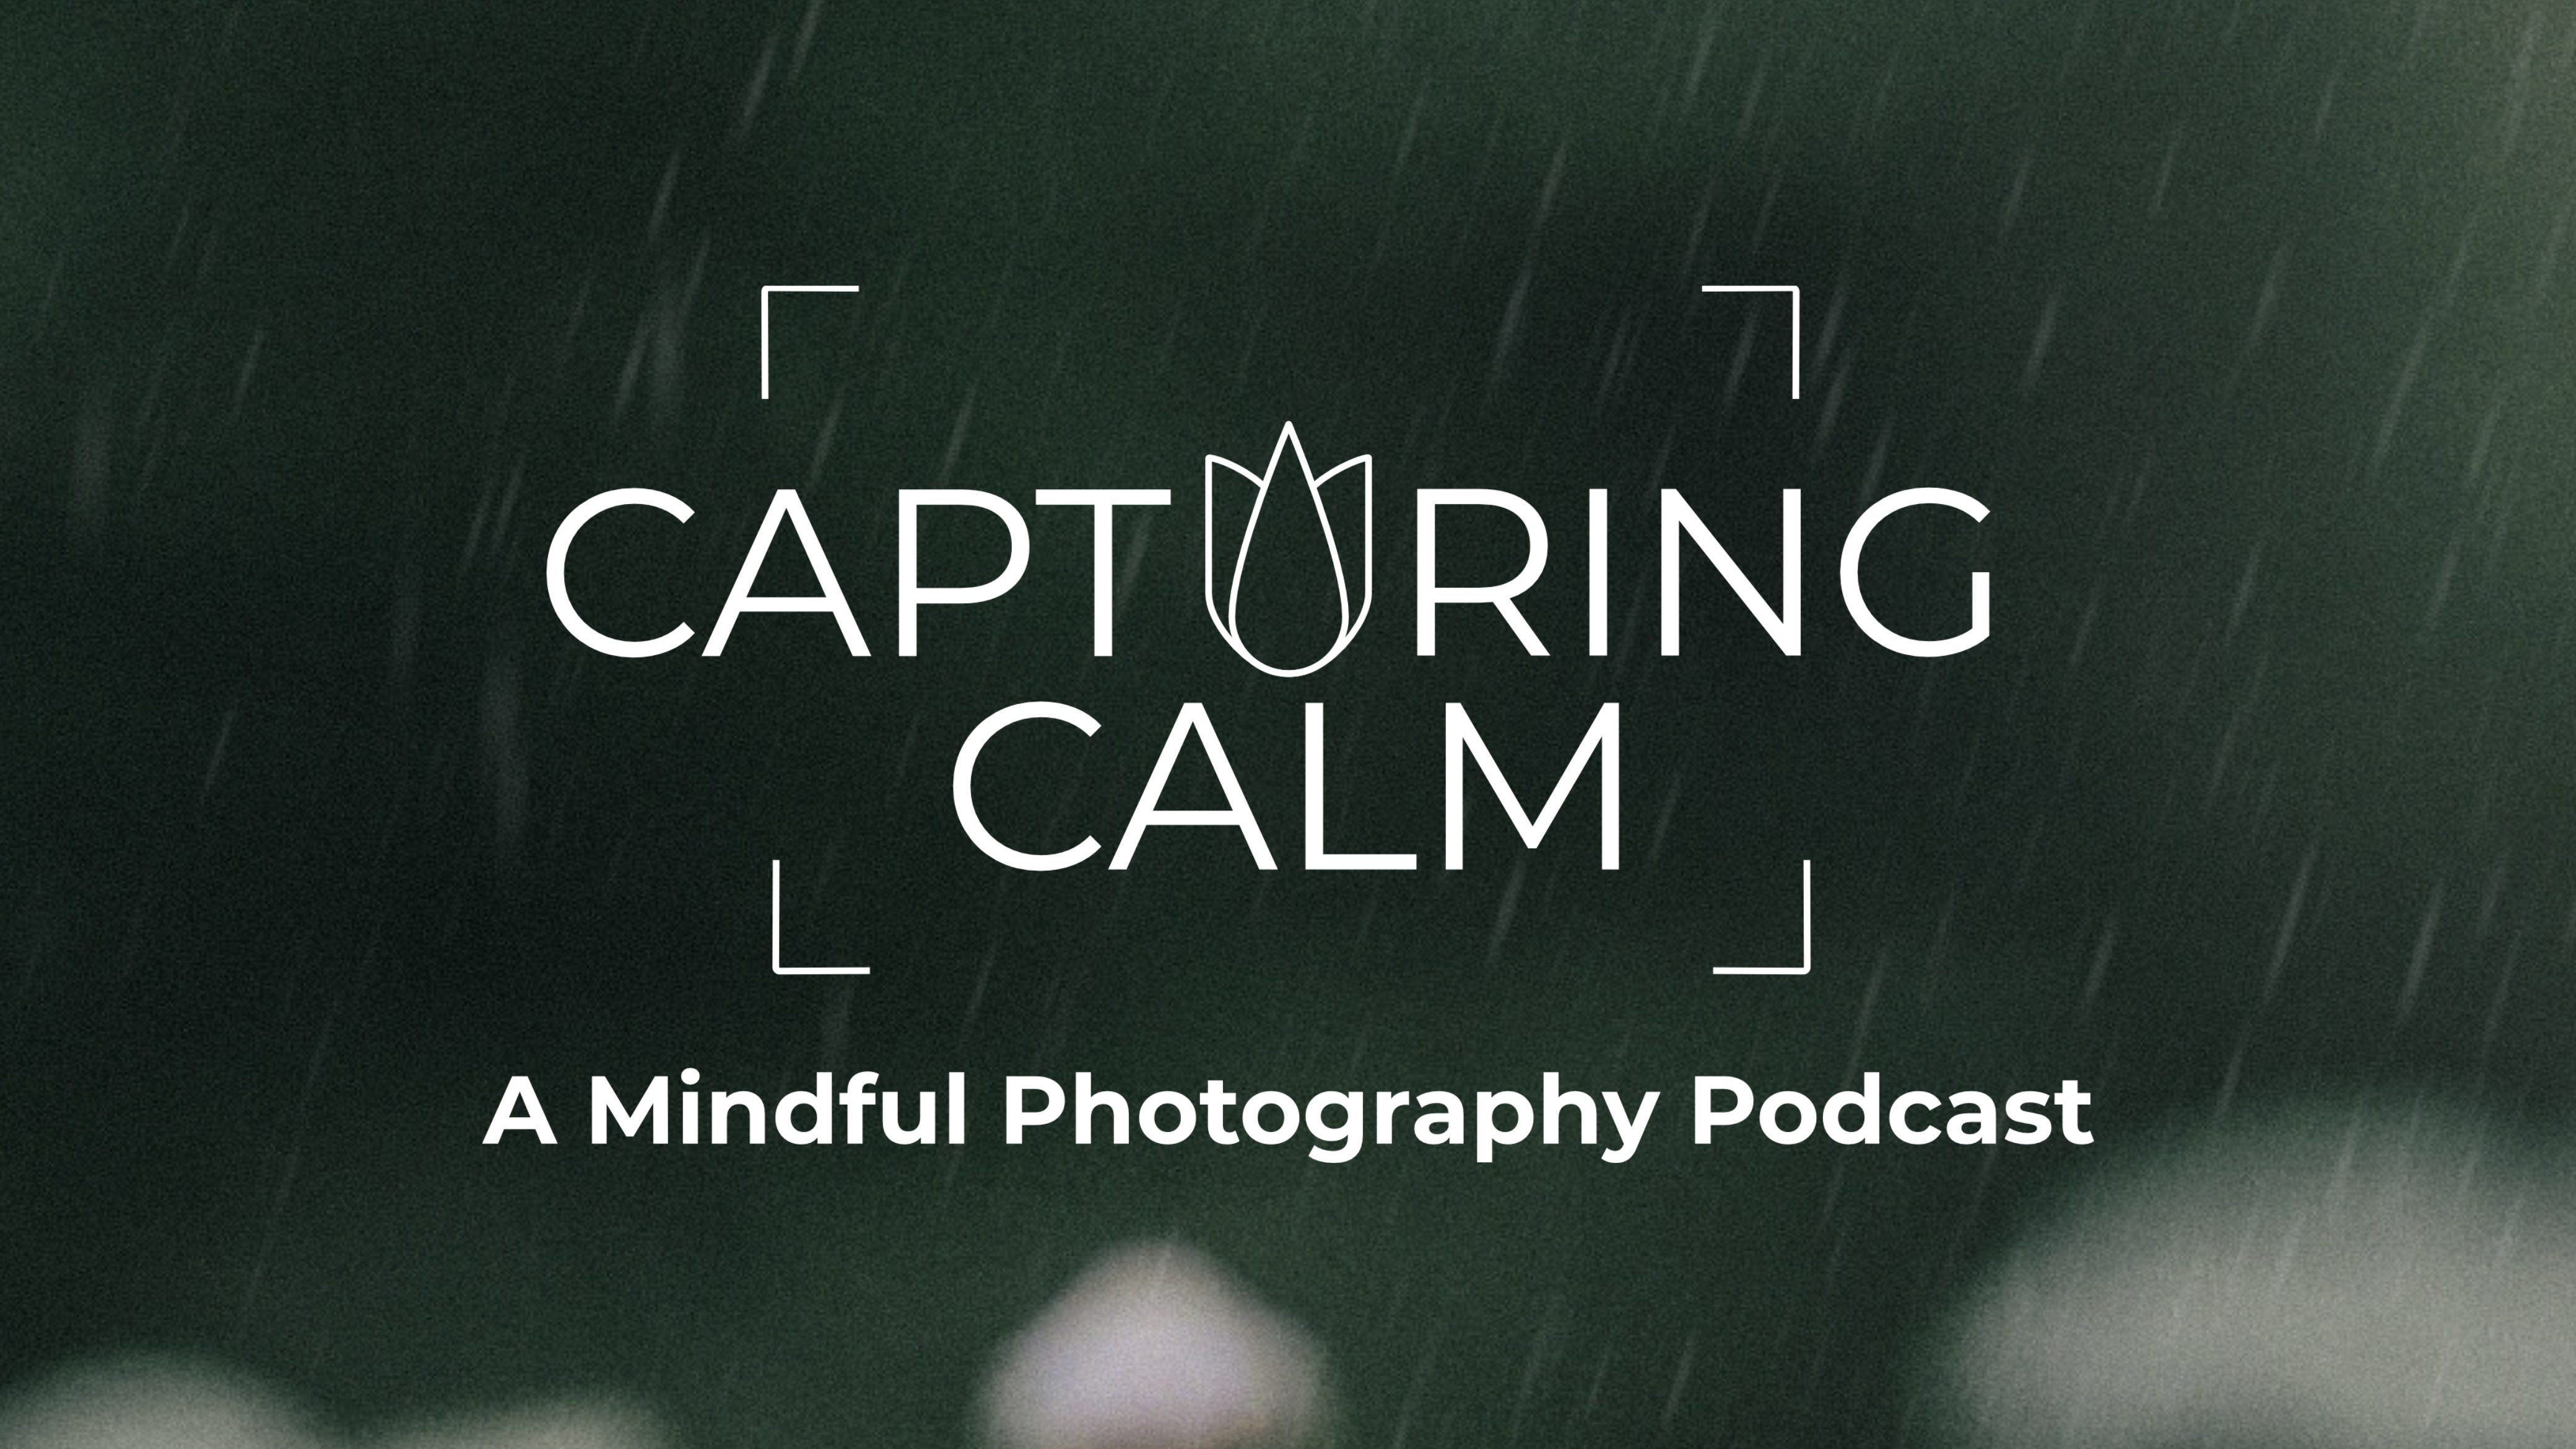 Capturing Calm - A New Mindful Photography Podcast